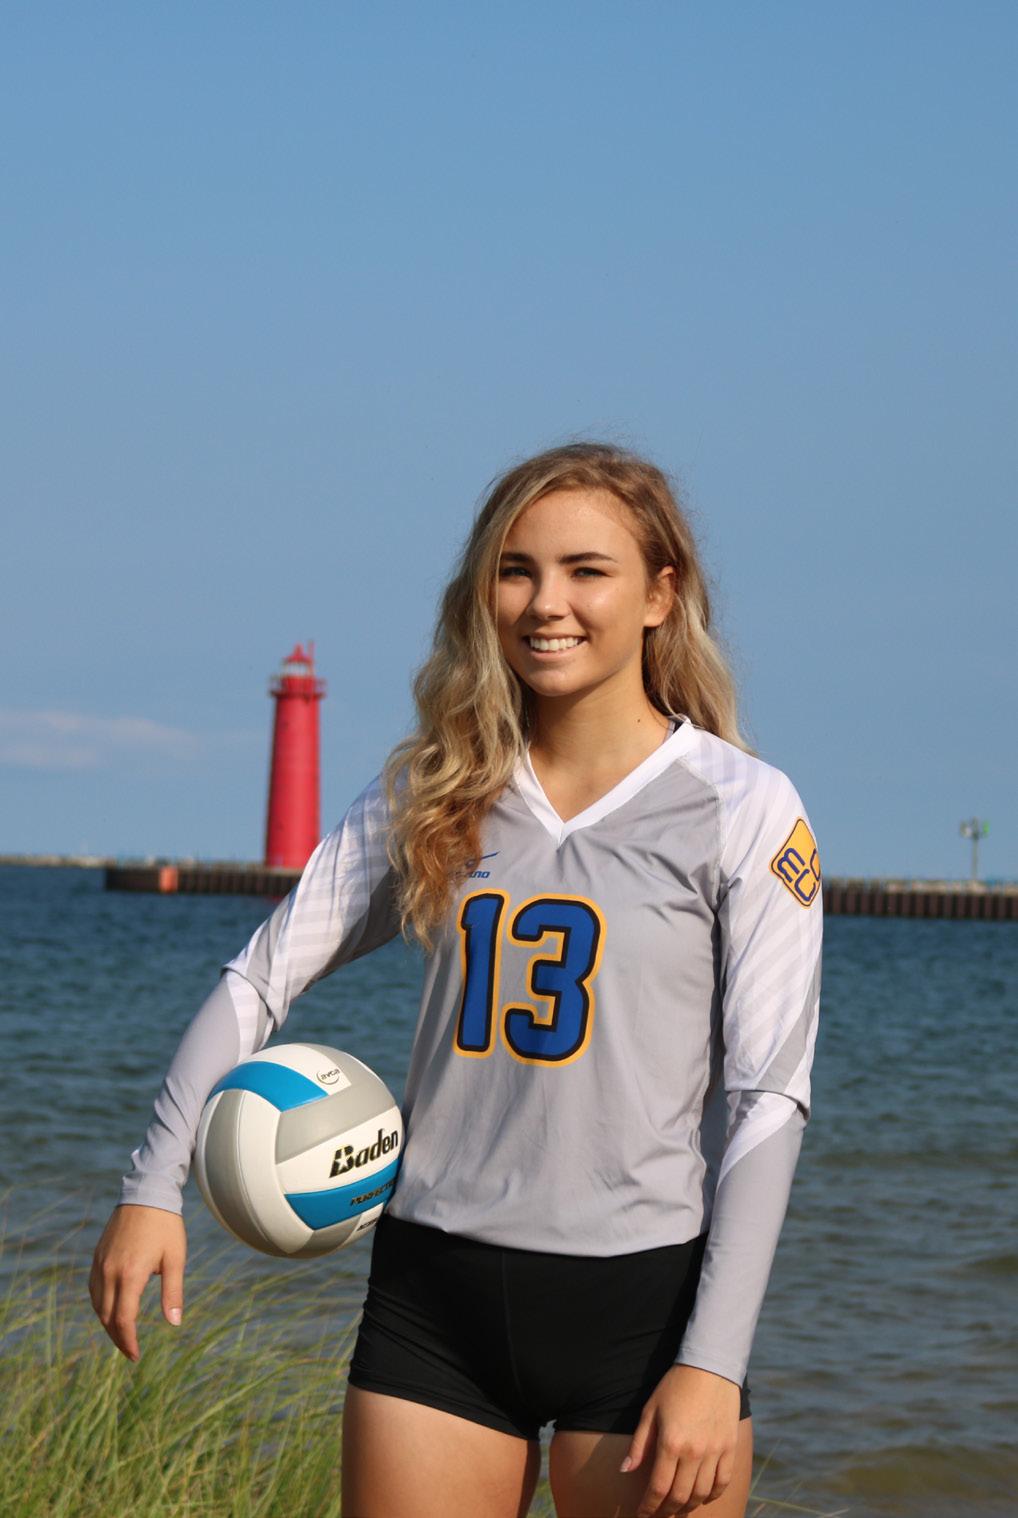 ..Chicken Alfredo Favorite Movie:...Ratatoullie Hobbies:...Tie Dying Name:...Gracie Reinhold Height:...5 9 Position:... Middle Hitter Parents:... Gail & Chris Reinhold Hometown:.